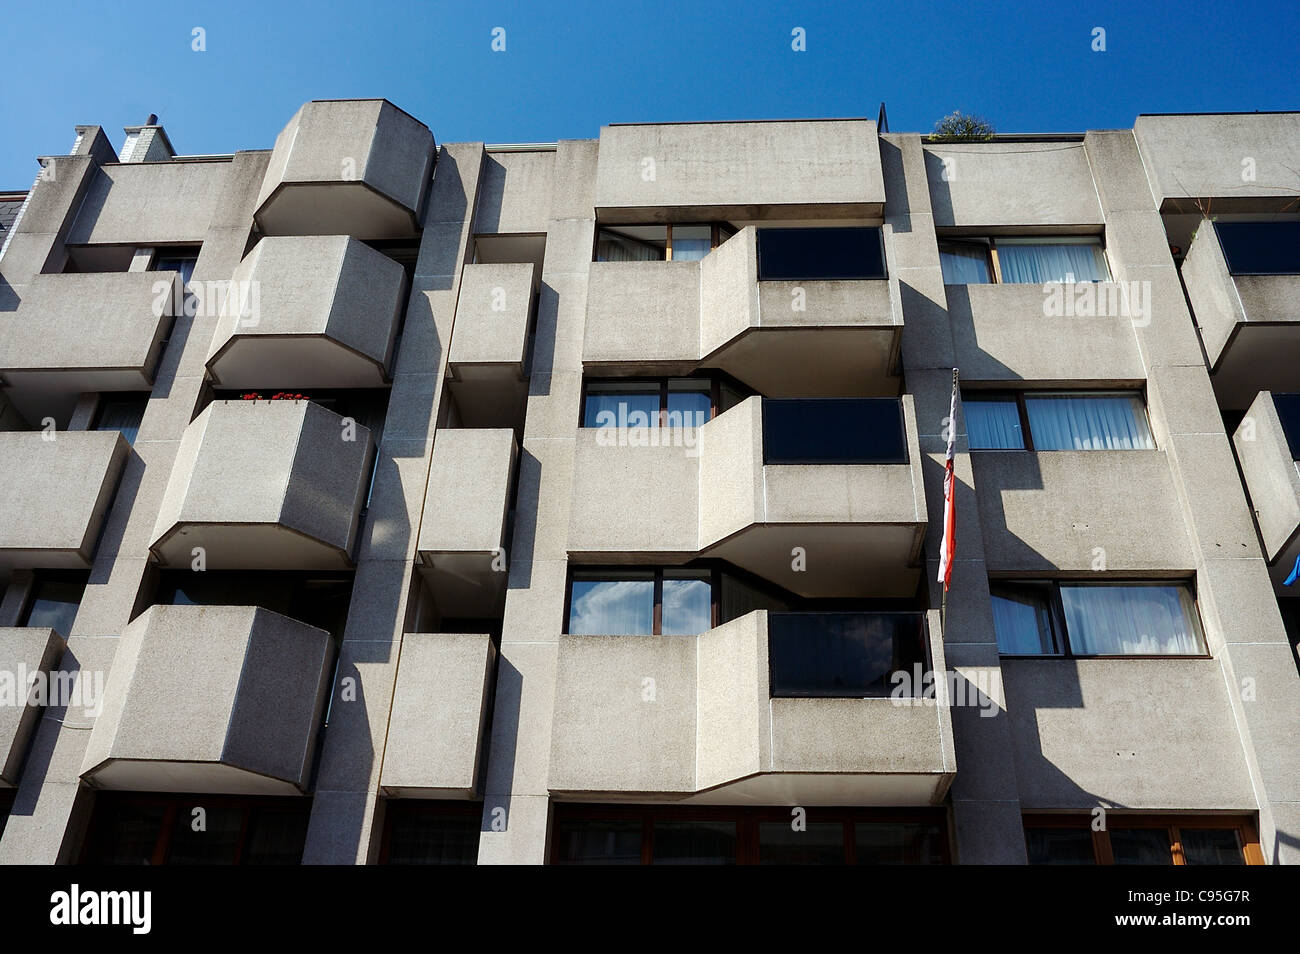 A modern, concrete apartment building in Brussels, Belgium Stock Photo